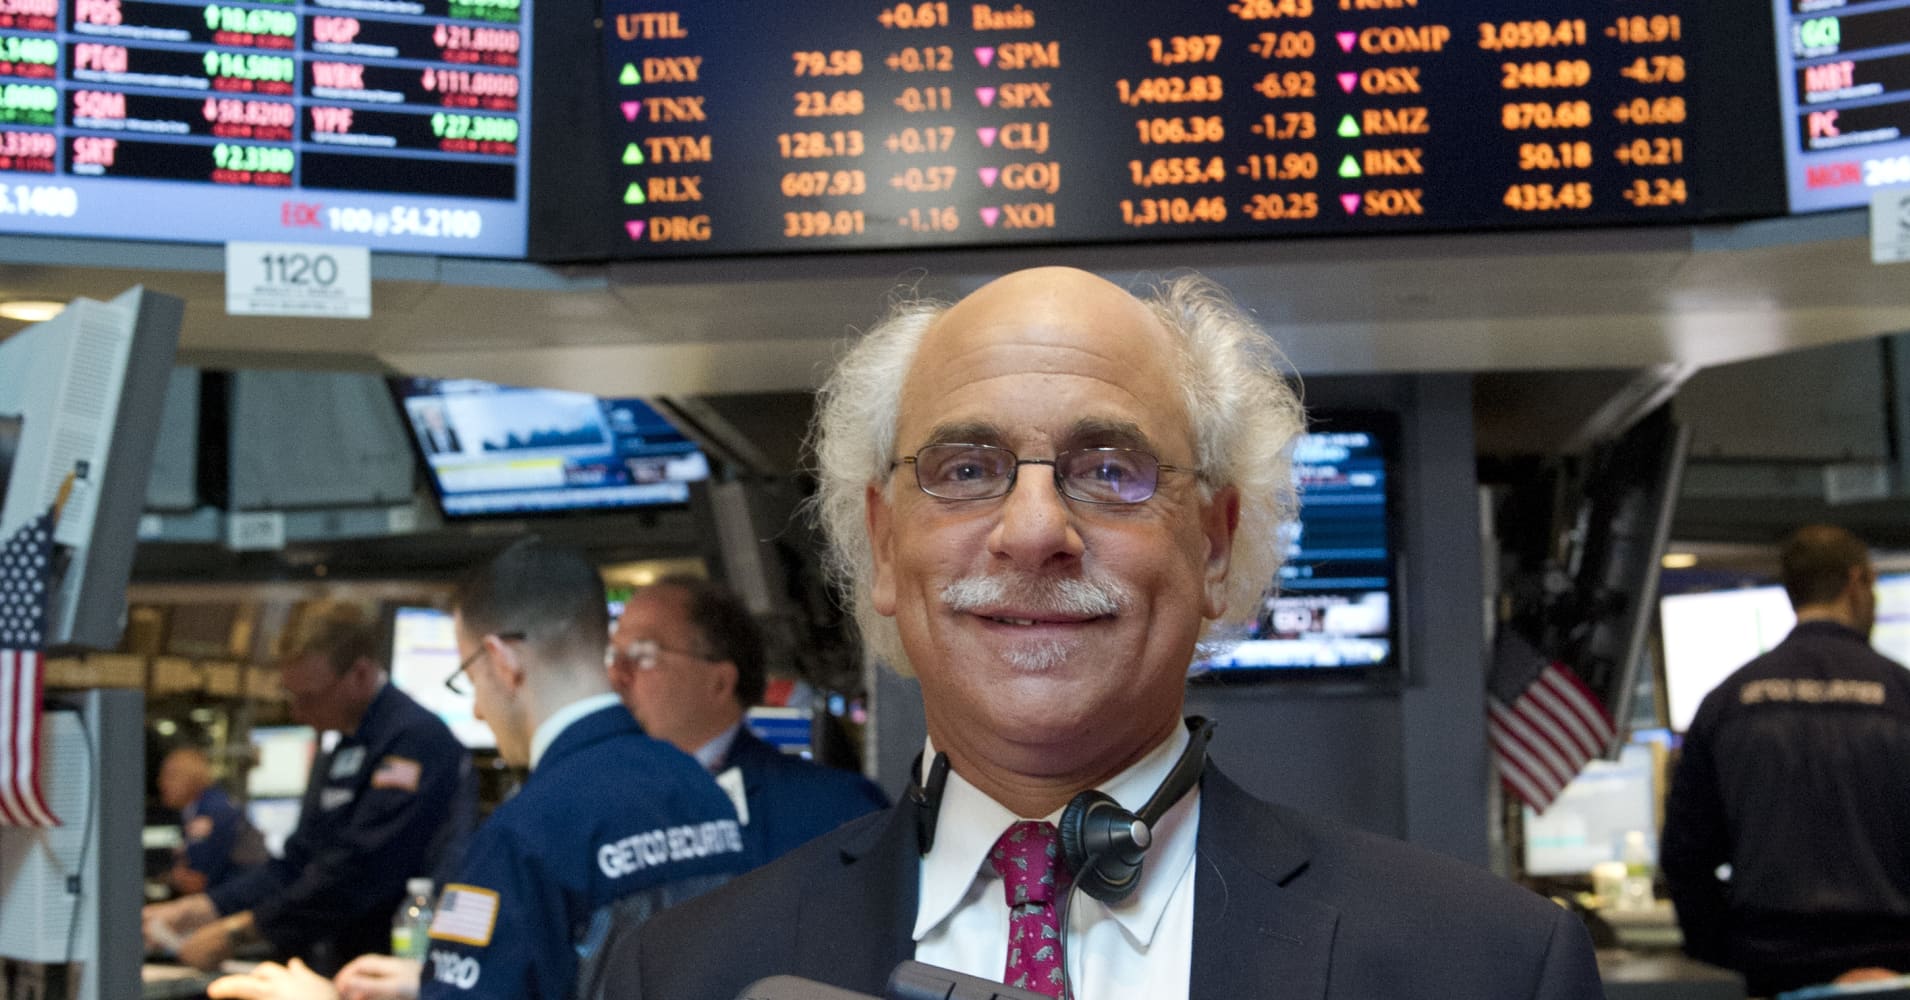 IG LIVE | Empowering the Future Generation with Financial Literacy with Peter Tuchman, Most Iconic Stock Broker at the New York Stock Exchange